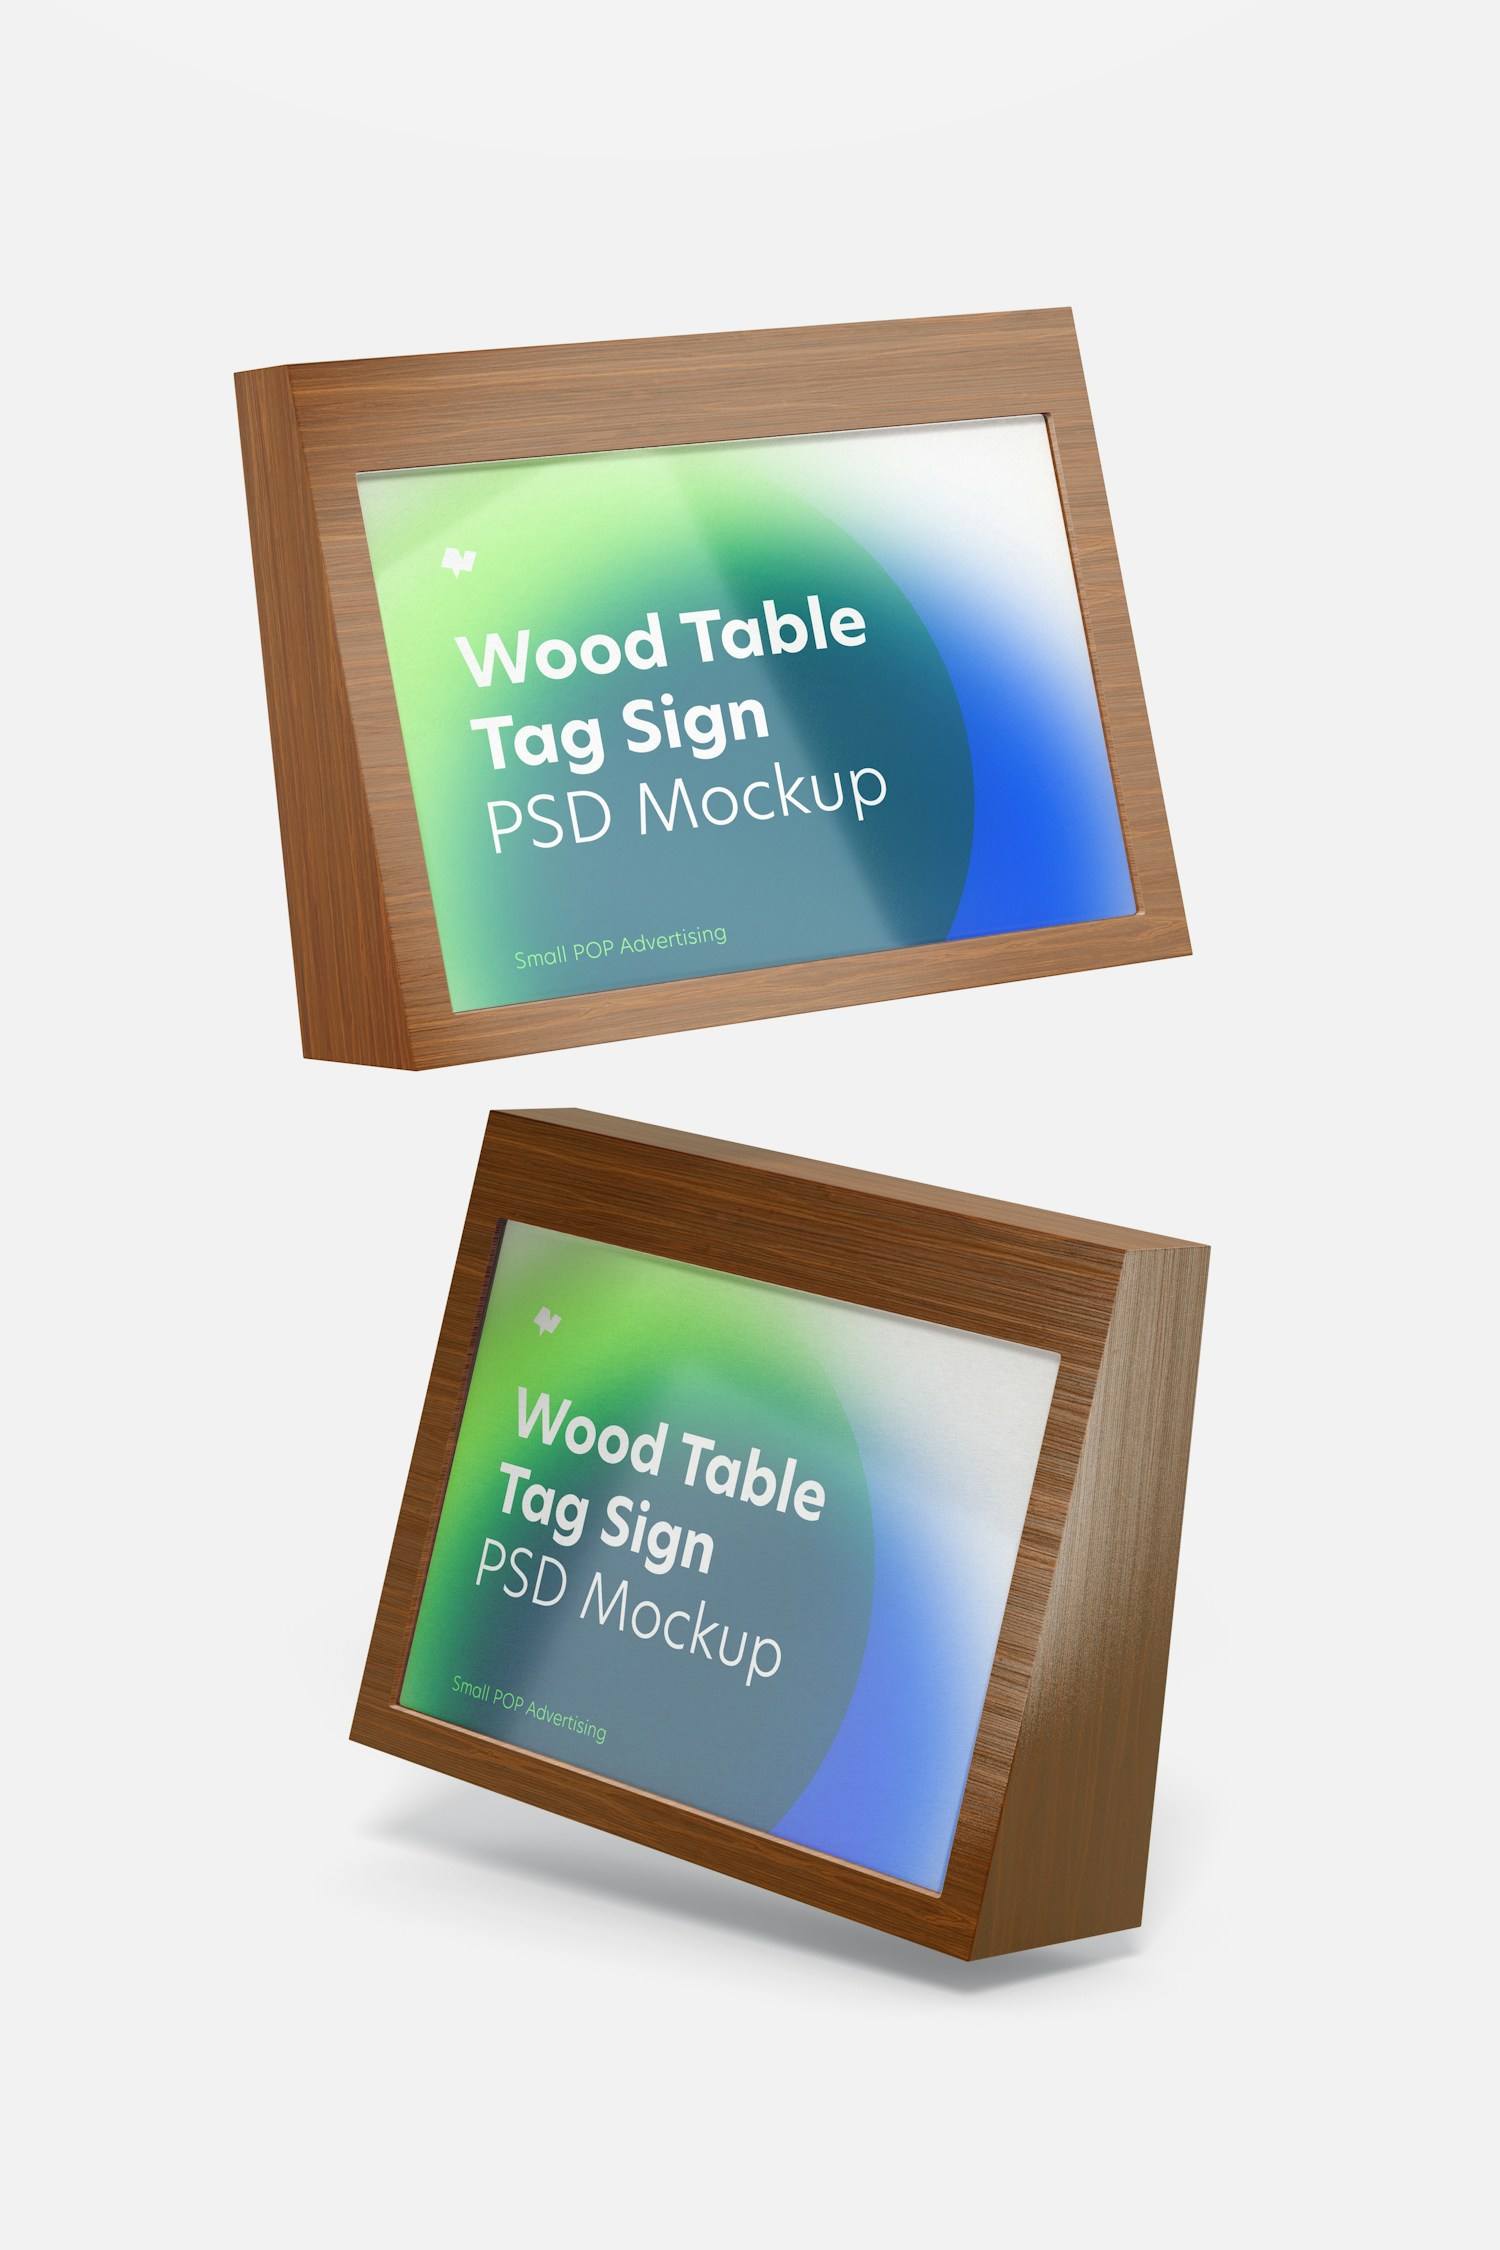 Wood Table Advertising Tag Signs Mockup, Floating